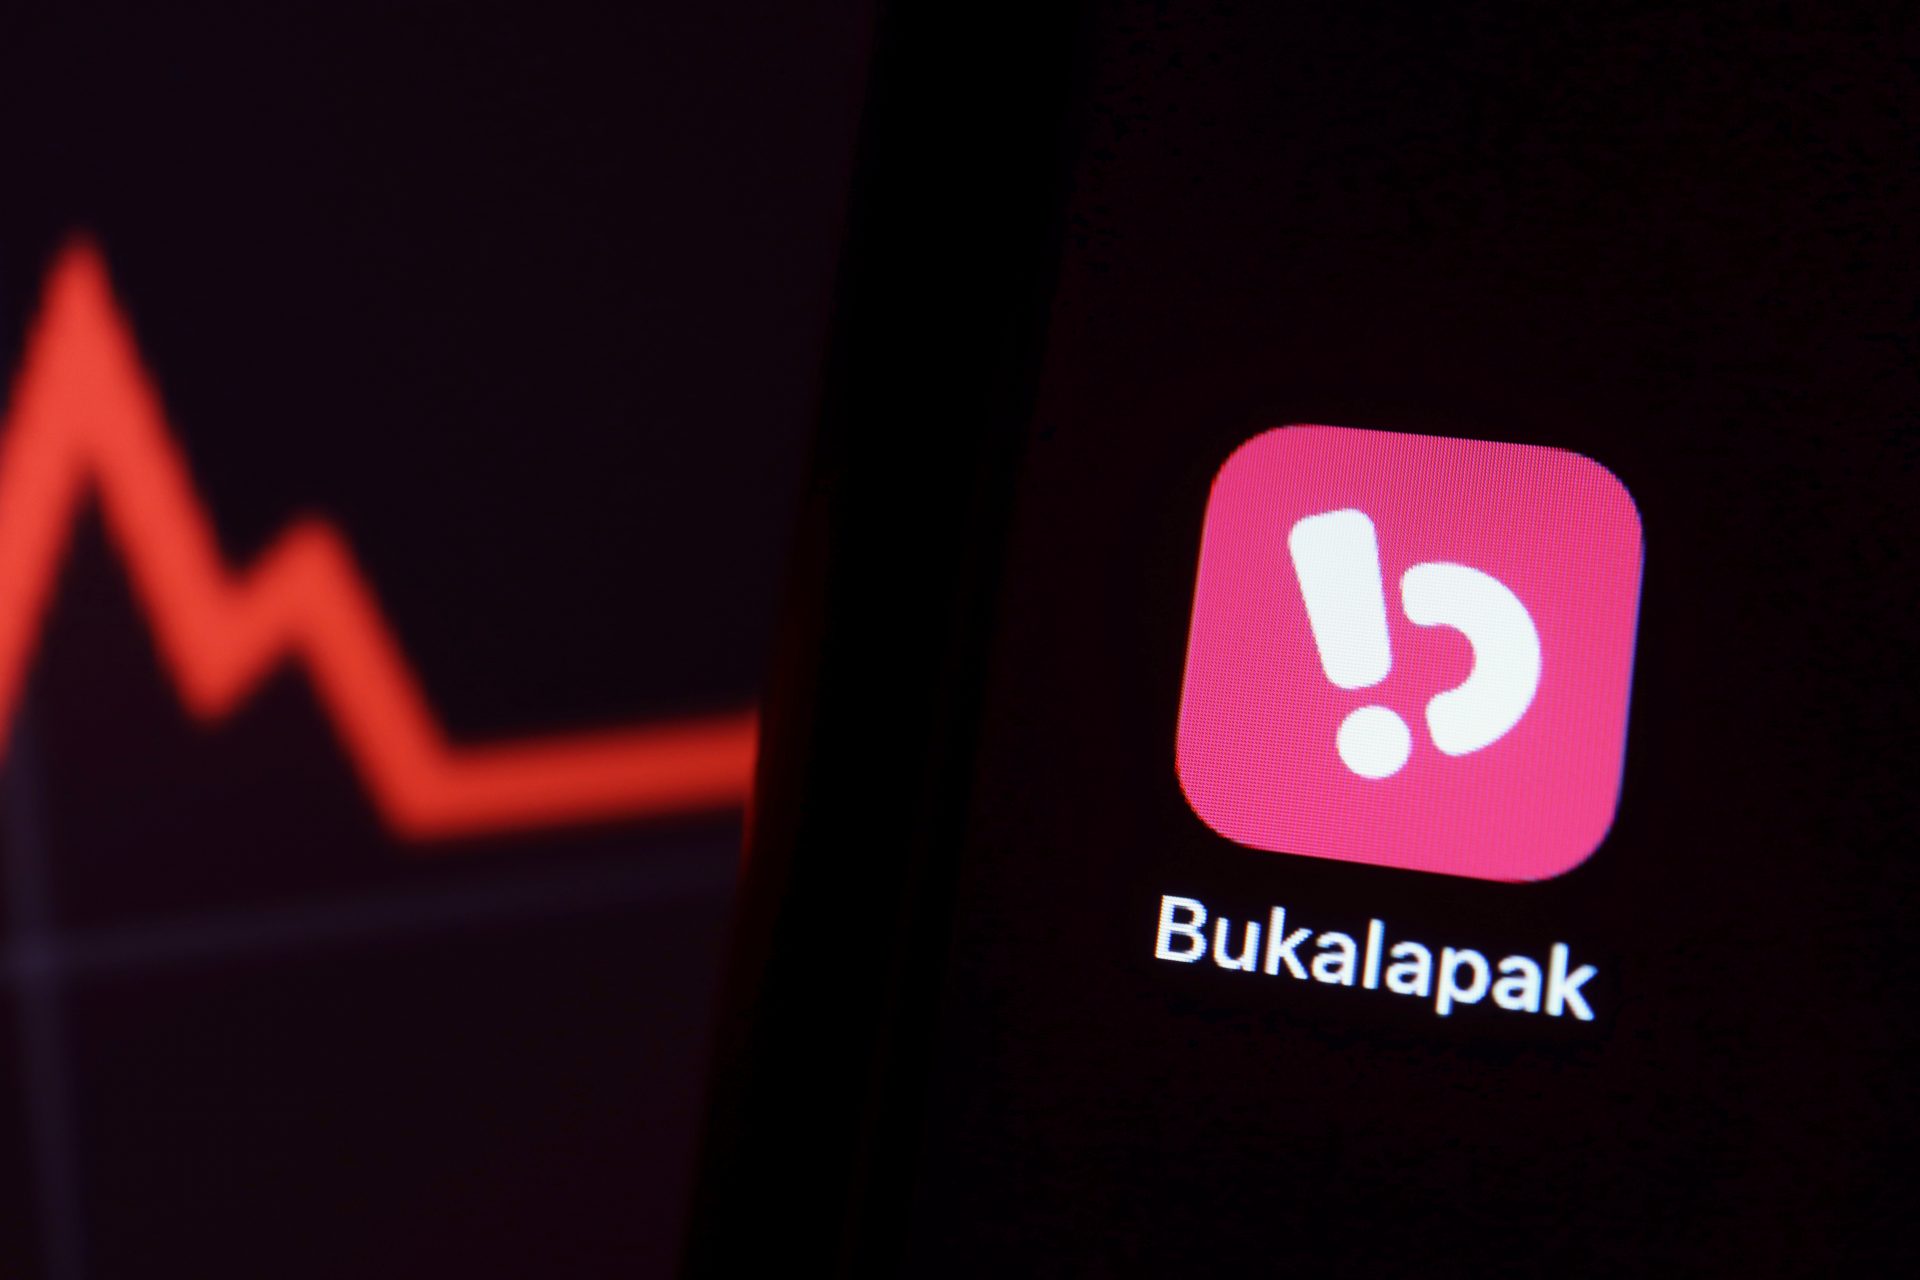 Daily Markup #311: Bukalapak shares soar 25% after IPO, now among Indonesia’s 15 biggest companies; Ee Ling Lim on how the pandemic has accelerated ESG innovation in Southeast Asia; Friz one of 10 selected for Iterative accelerator out of 330+